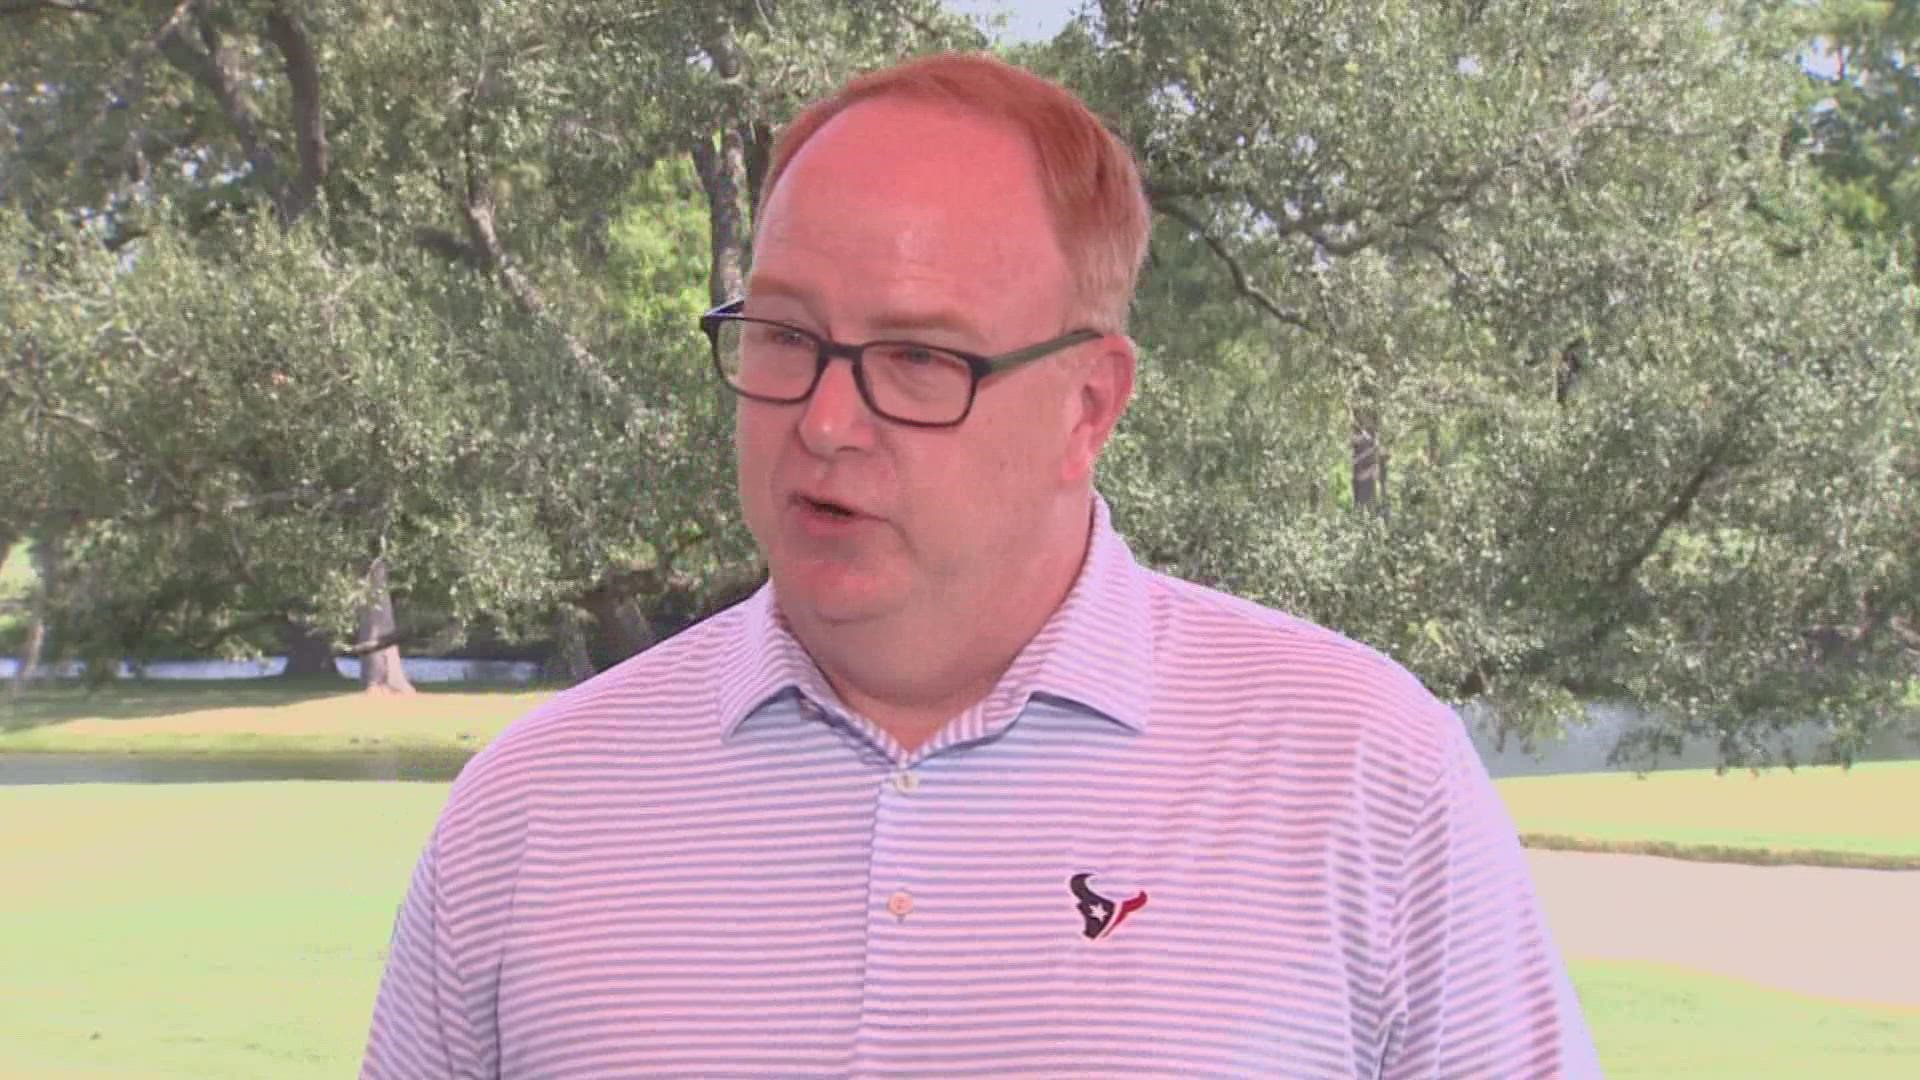 It's a first for the Houston Texans with the 2022 schedule being released Thursday.